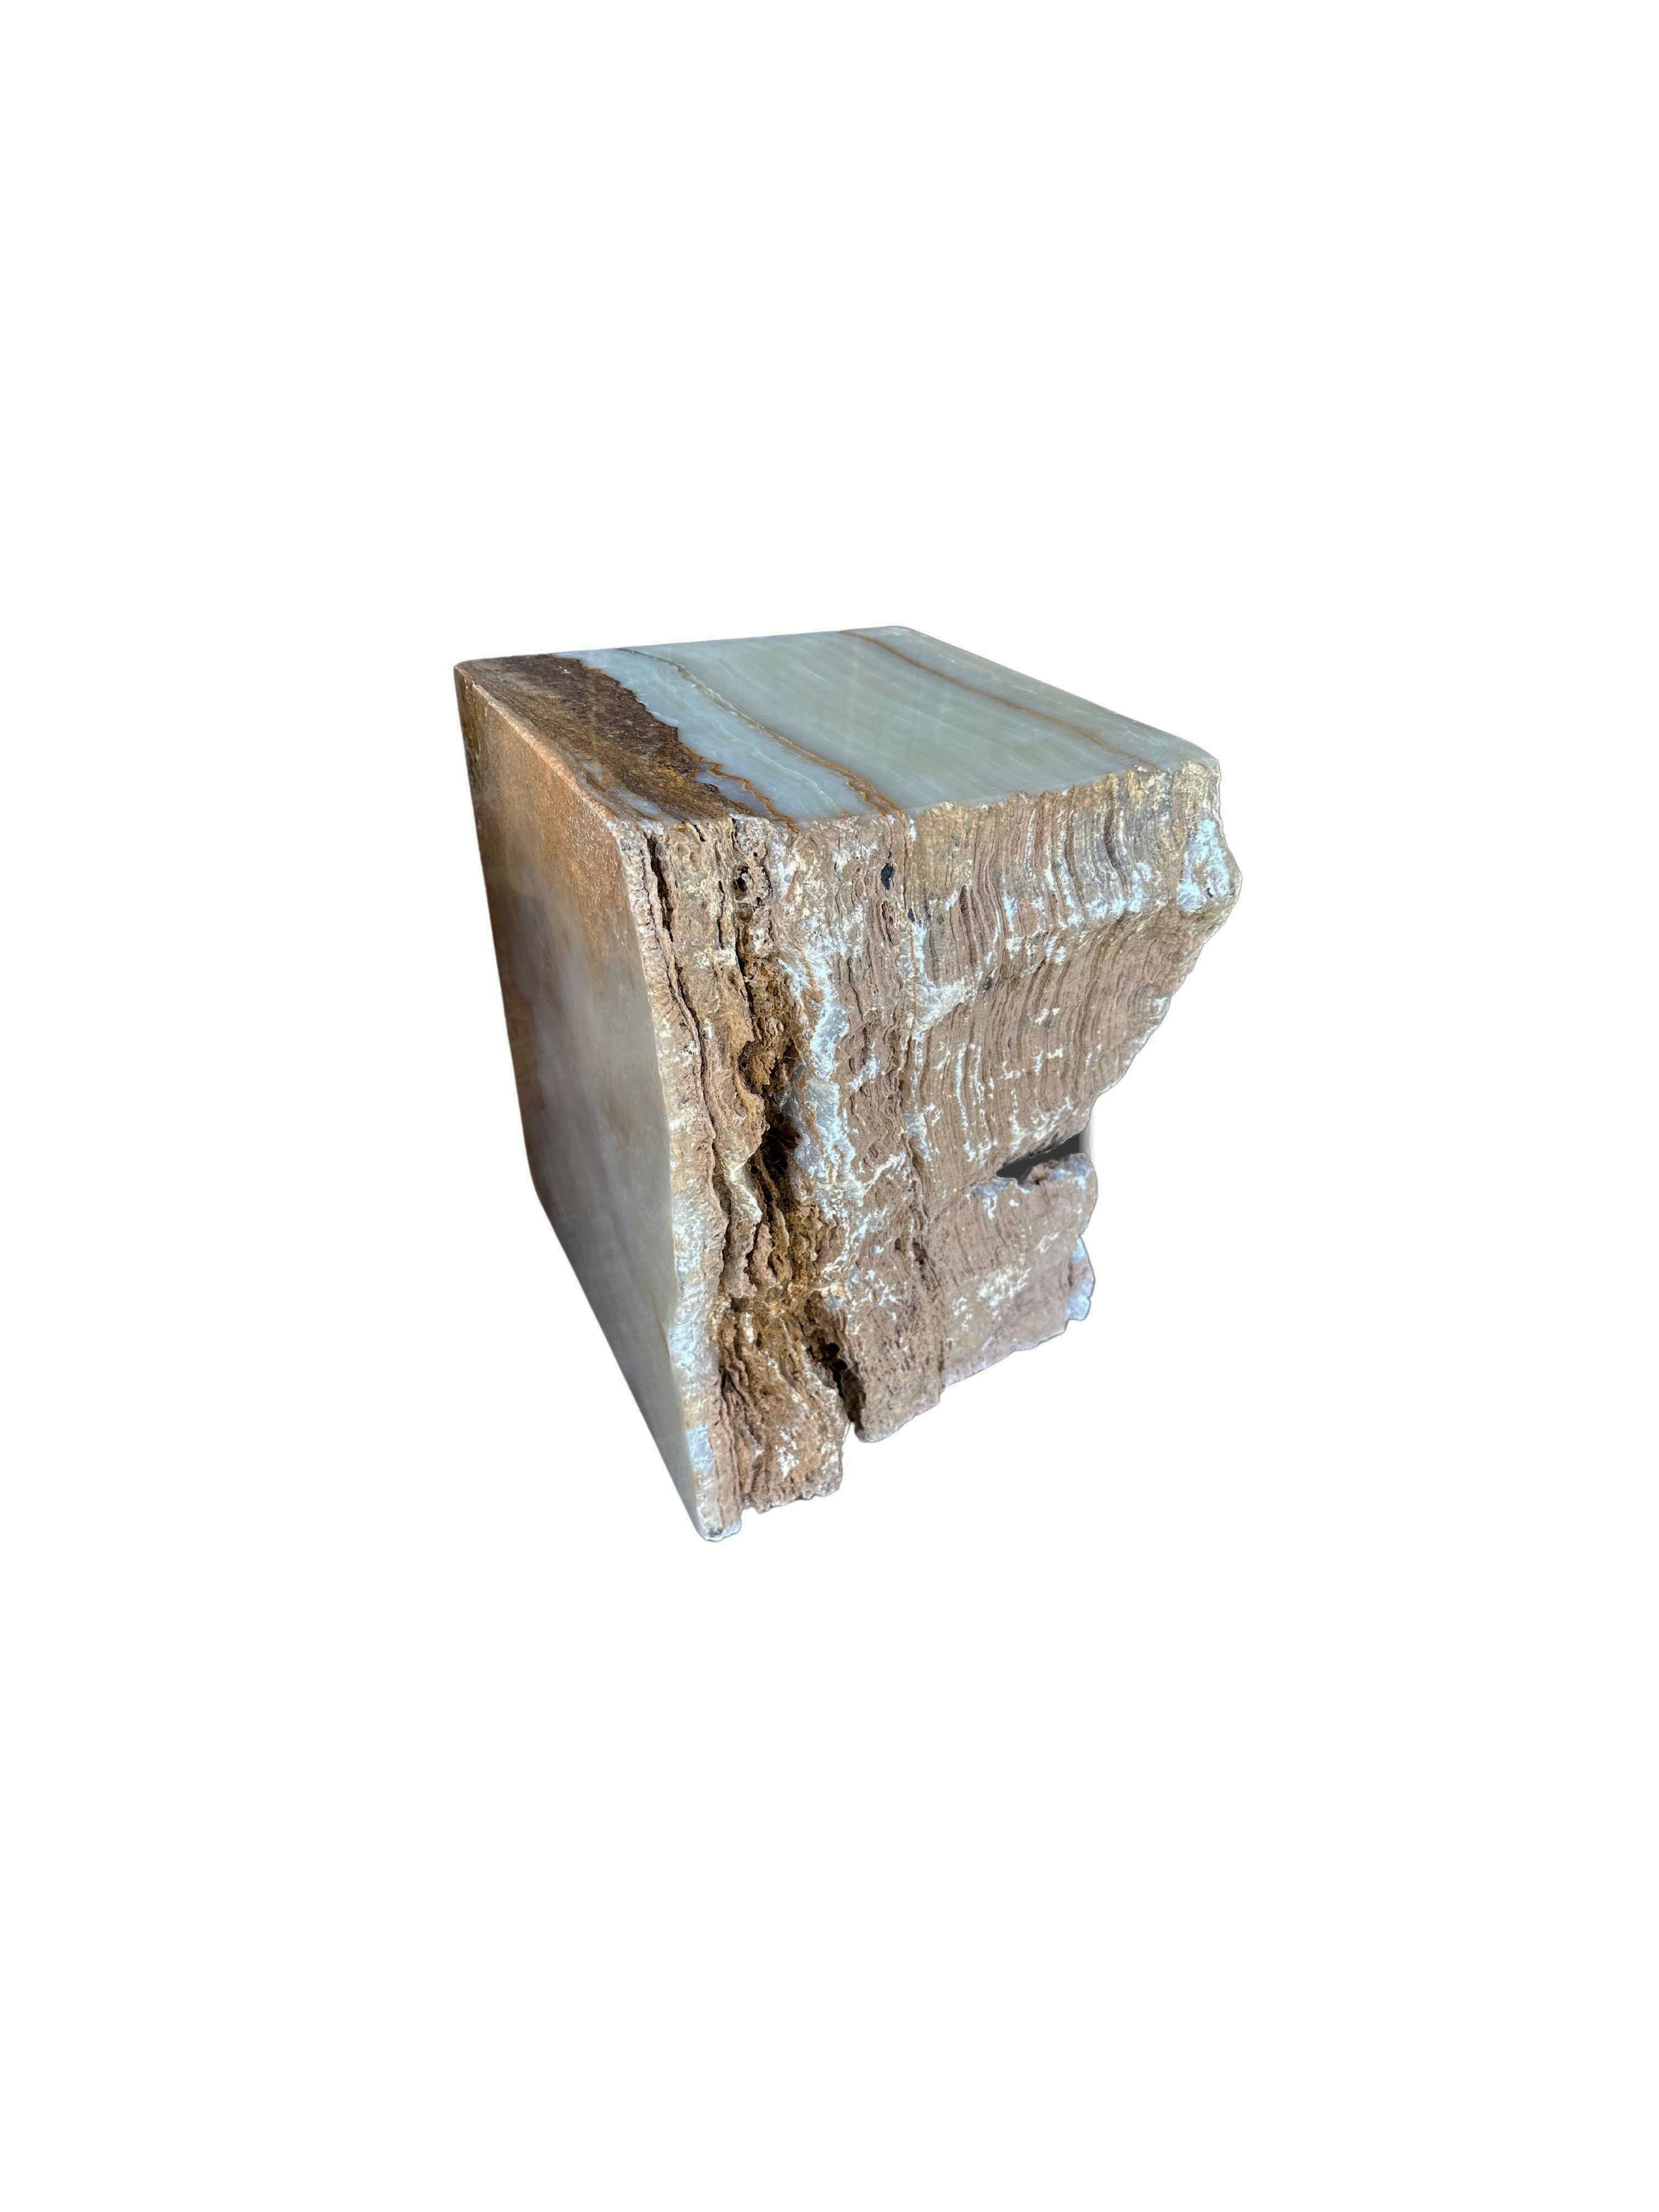 Jupiter Onyx Marble Side Table with Stunning Textures, Modern Organic In Good Condition For Sale In Jimbaran, Bali